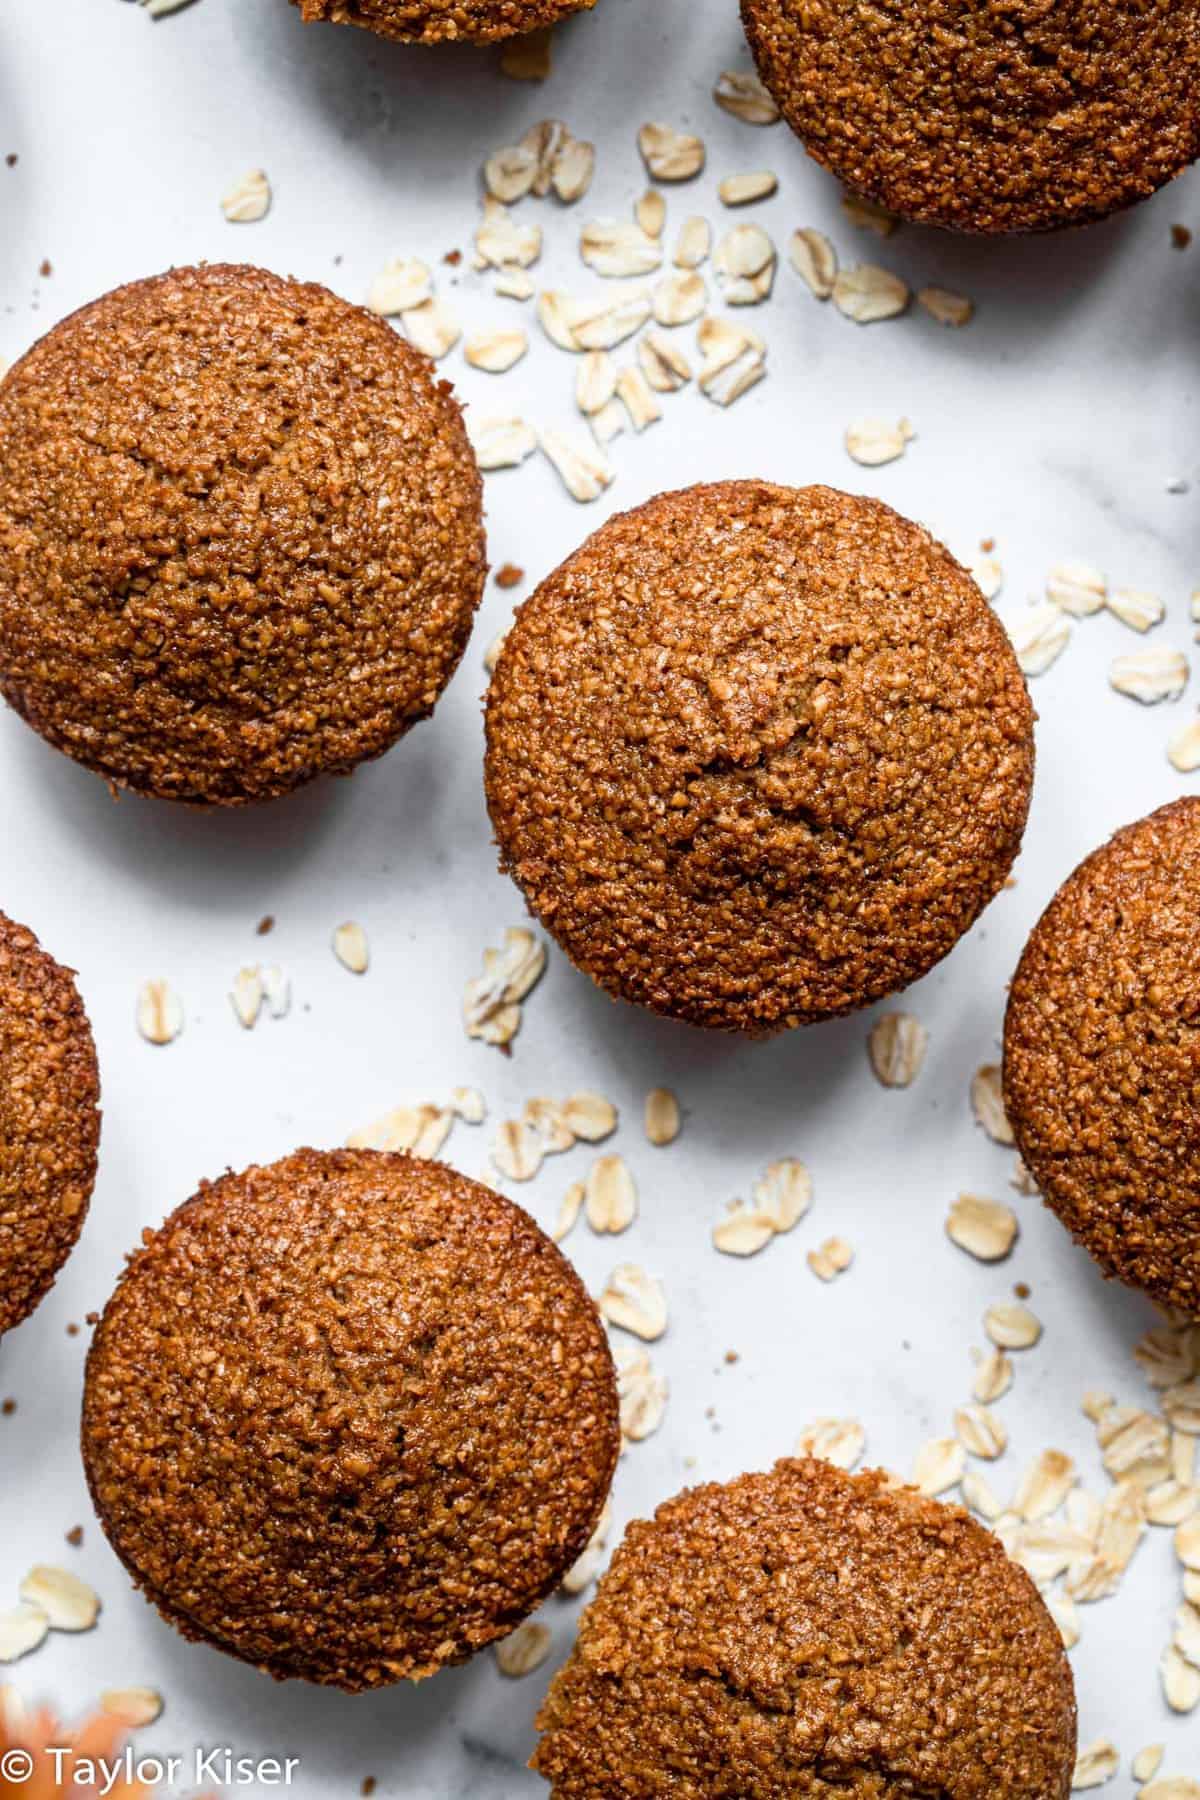 the tops of healthy oat bran muffins on a table with oats around them